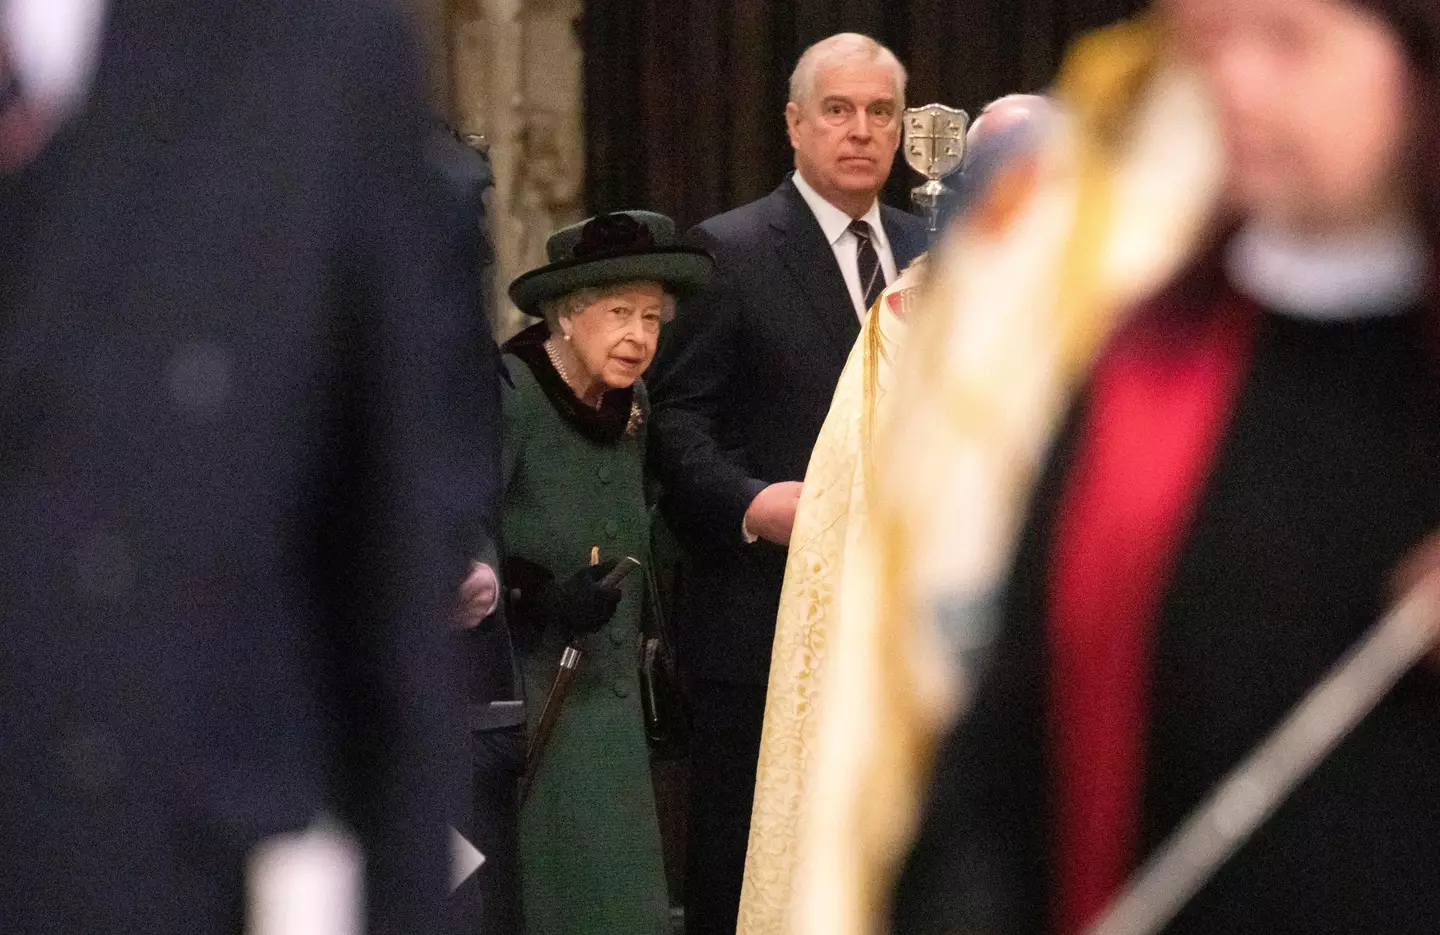 Queen Elizabeth II and the Duke of York arrive at a Service of Thanksgiving for the life of the Duke of Edinburgh, at Westminster Abbey in London.